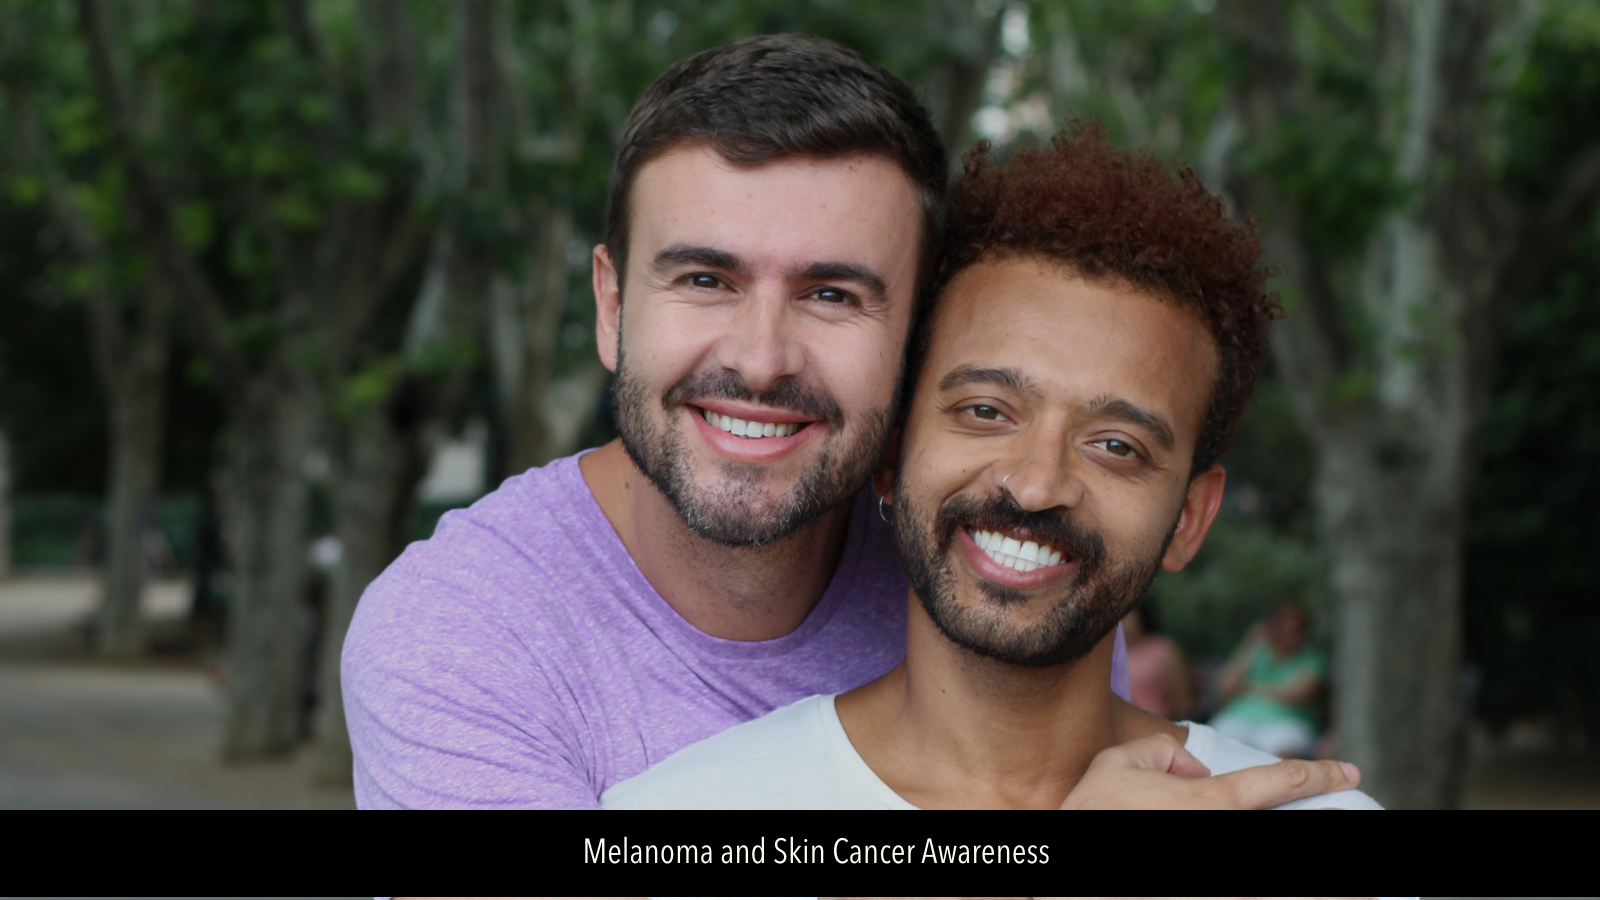 Image of male gay couple in an embrace and smiling at camera